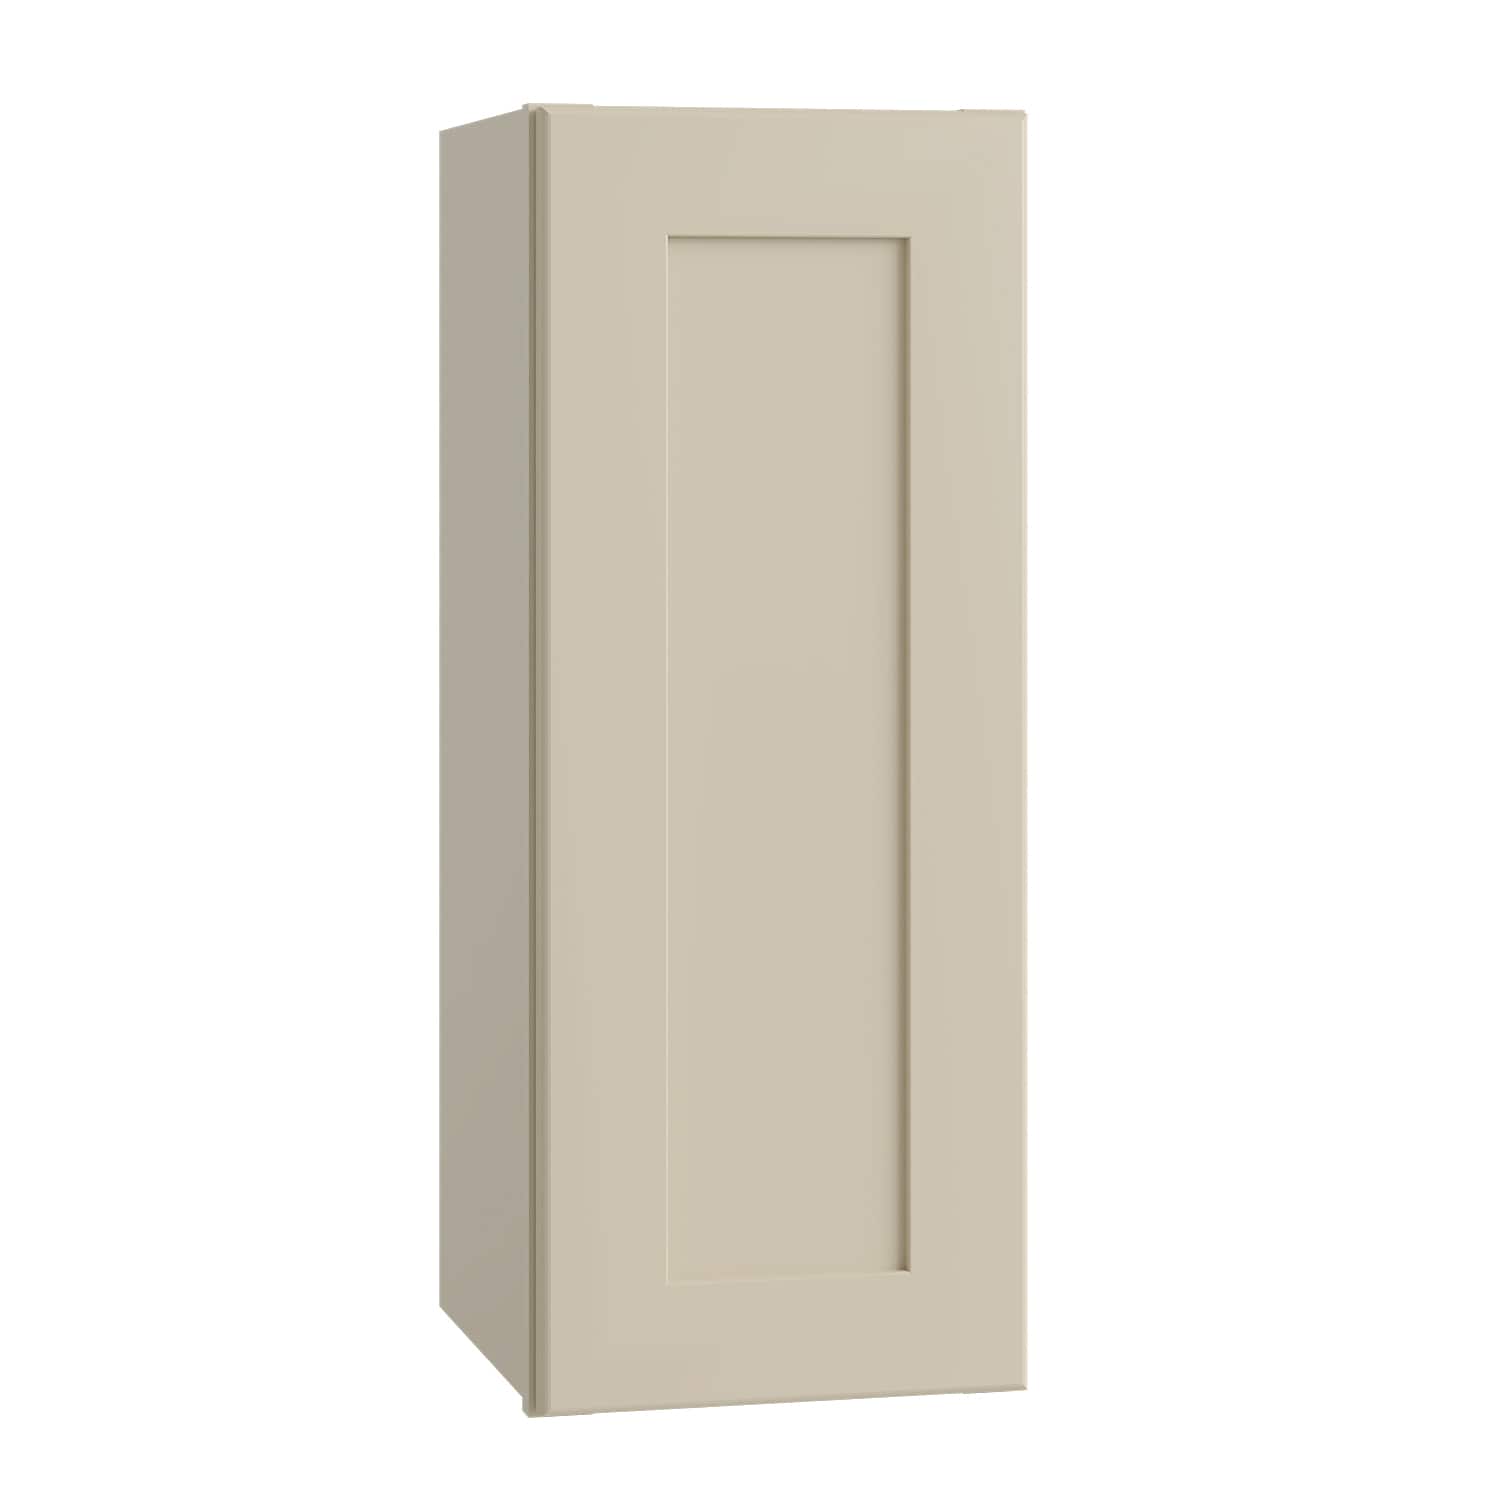 Luxxe Cabinetry 15-in W x 30-in H x 12-in D Norfolk Blended Cream Painted Door Wall Fully Assembled Semi-custom Cabinet in Off-White | W1530L-NBC